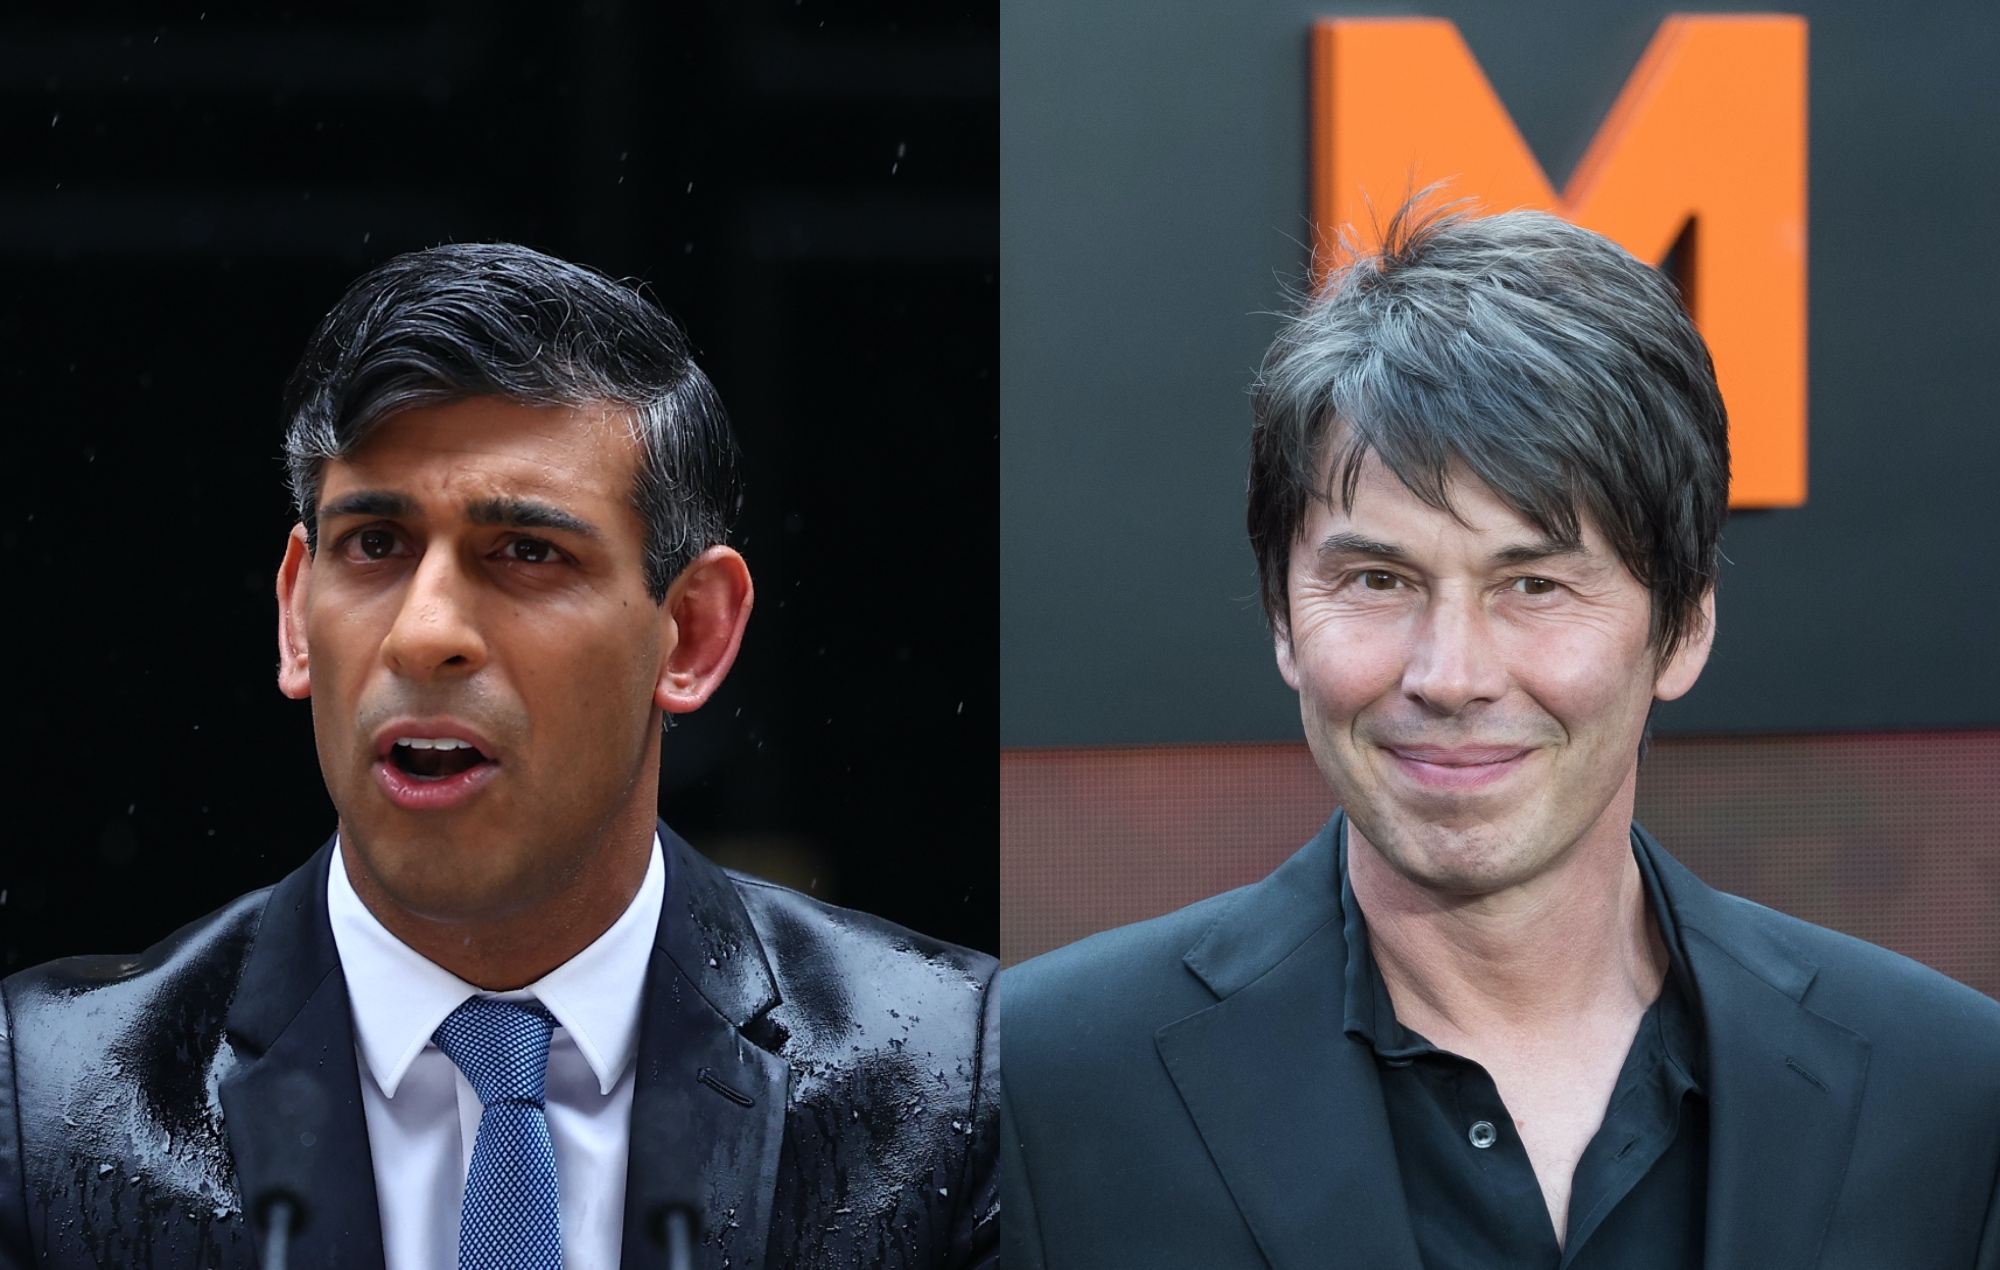 Professor Brian Cox responds to D:Ream’s ‘Things Can Only Get Better’ drowning out Rishi Sunak’s election announcement